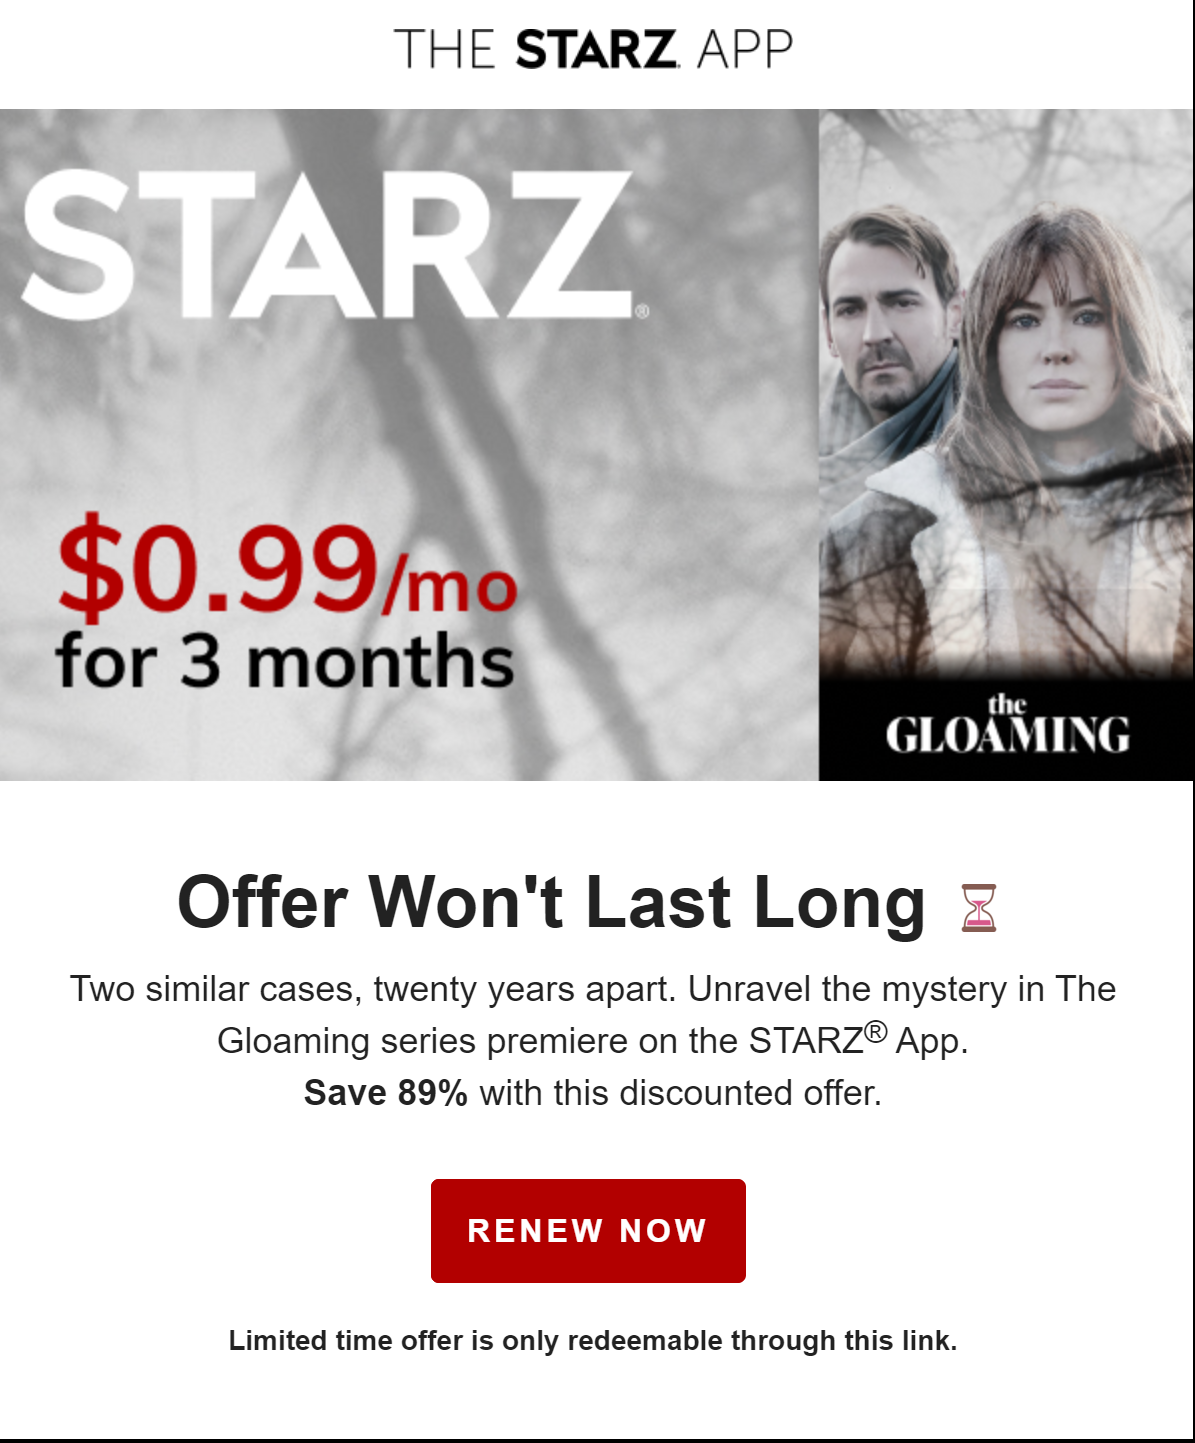 A promotional email from STARZ offering a 89% discount for 3 months if I renew my membership now. 